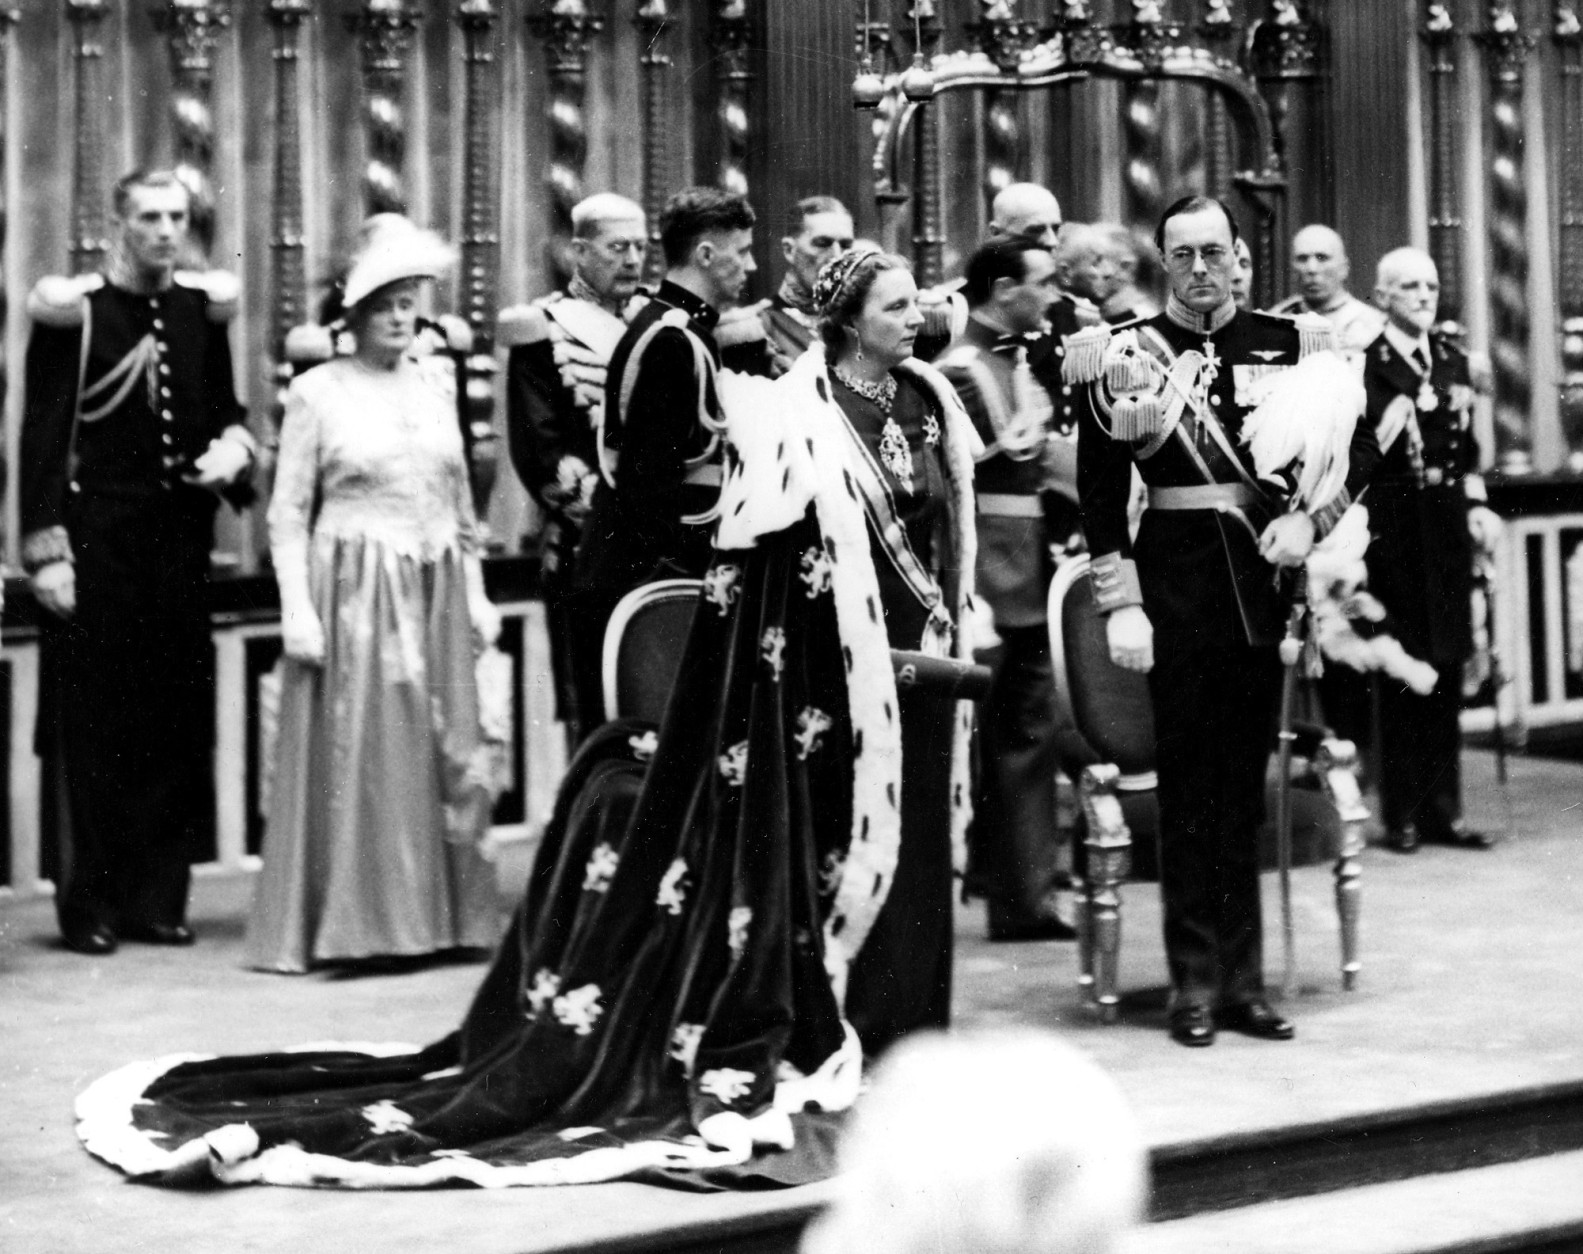 Dutch Queen Juliana,  with Prince Bernhard, is seen in this September 1948  photo, during her official inauguration ceremony as queen of the Netherlands in New Church in Amsterdam. Juliana, the popular queen mother of the Netherlands, who presided over the dismantling of the centuries-old Dutch empire and witnessed the birth of a social revolution during her 31-year reign, died as a result of pneumonia early Saturday morning March 20, 2004, at the age of 94. (AP Photo/NFP)